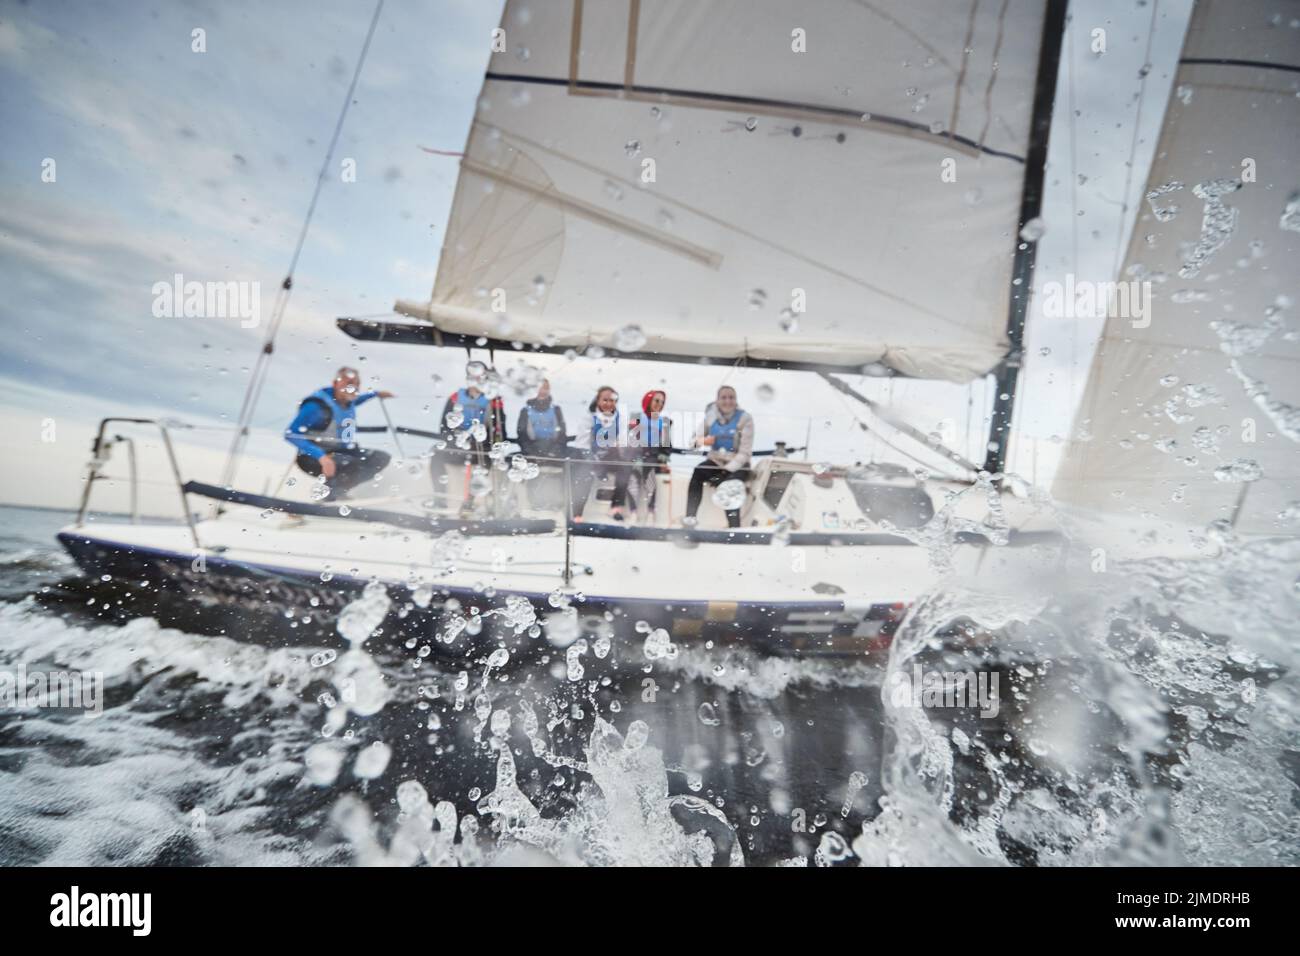 Russia, St.Petersburg, 05 September 2020: Participants of a sailing regatta on the sailboat, pull ropes, water splashes in the f Stock Photo